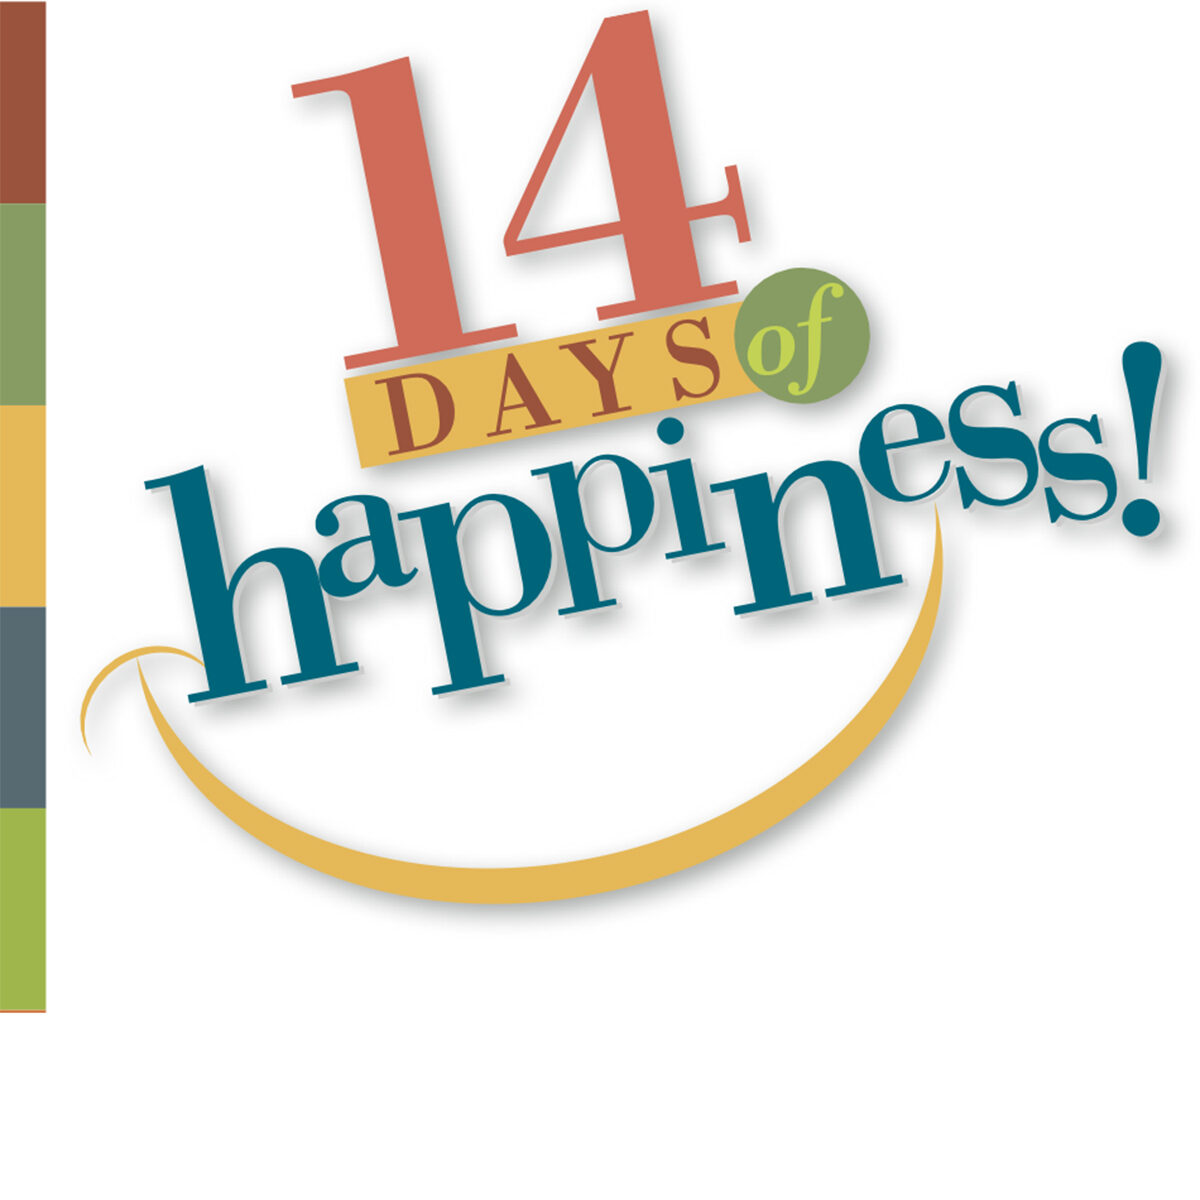 14DaysofHappiness